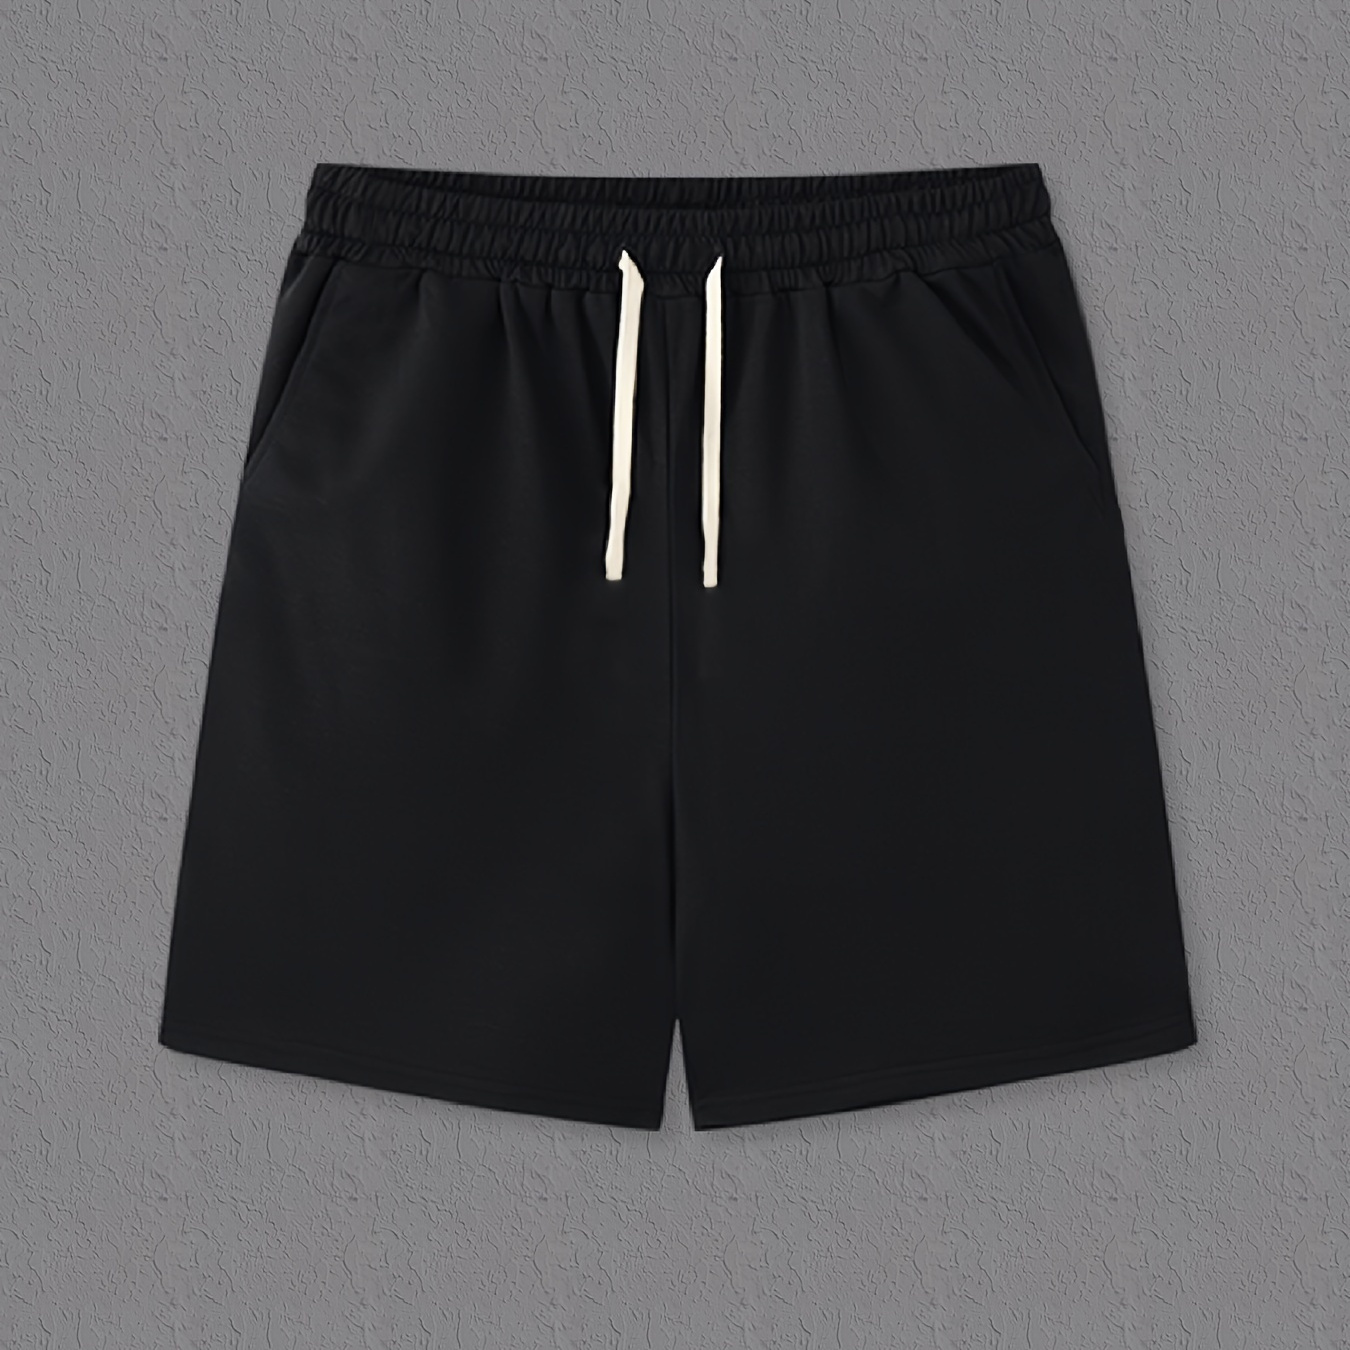 

Comfy Solid Shorts, Men's Casual Solid Color Slightly Stretch Elastic Waist Drawstring Shorts For Summer Basketball Beach Resort